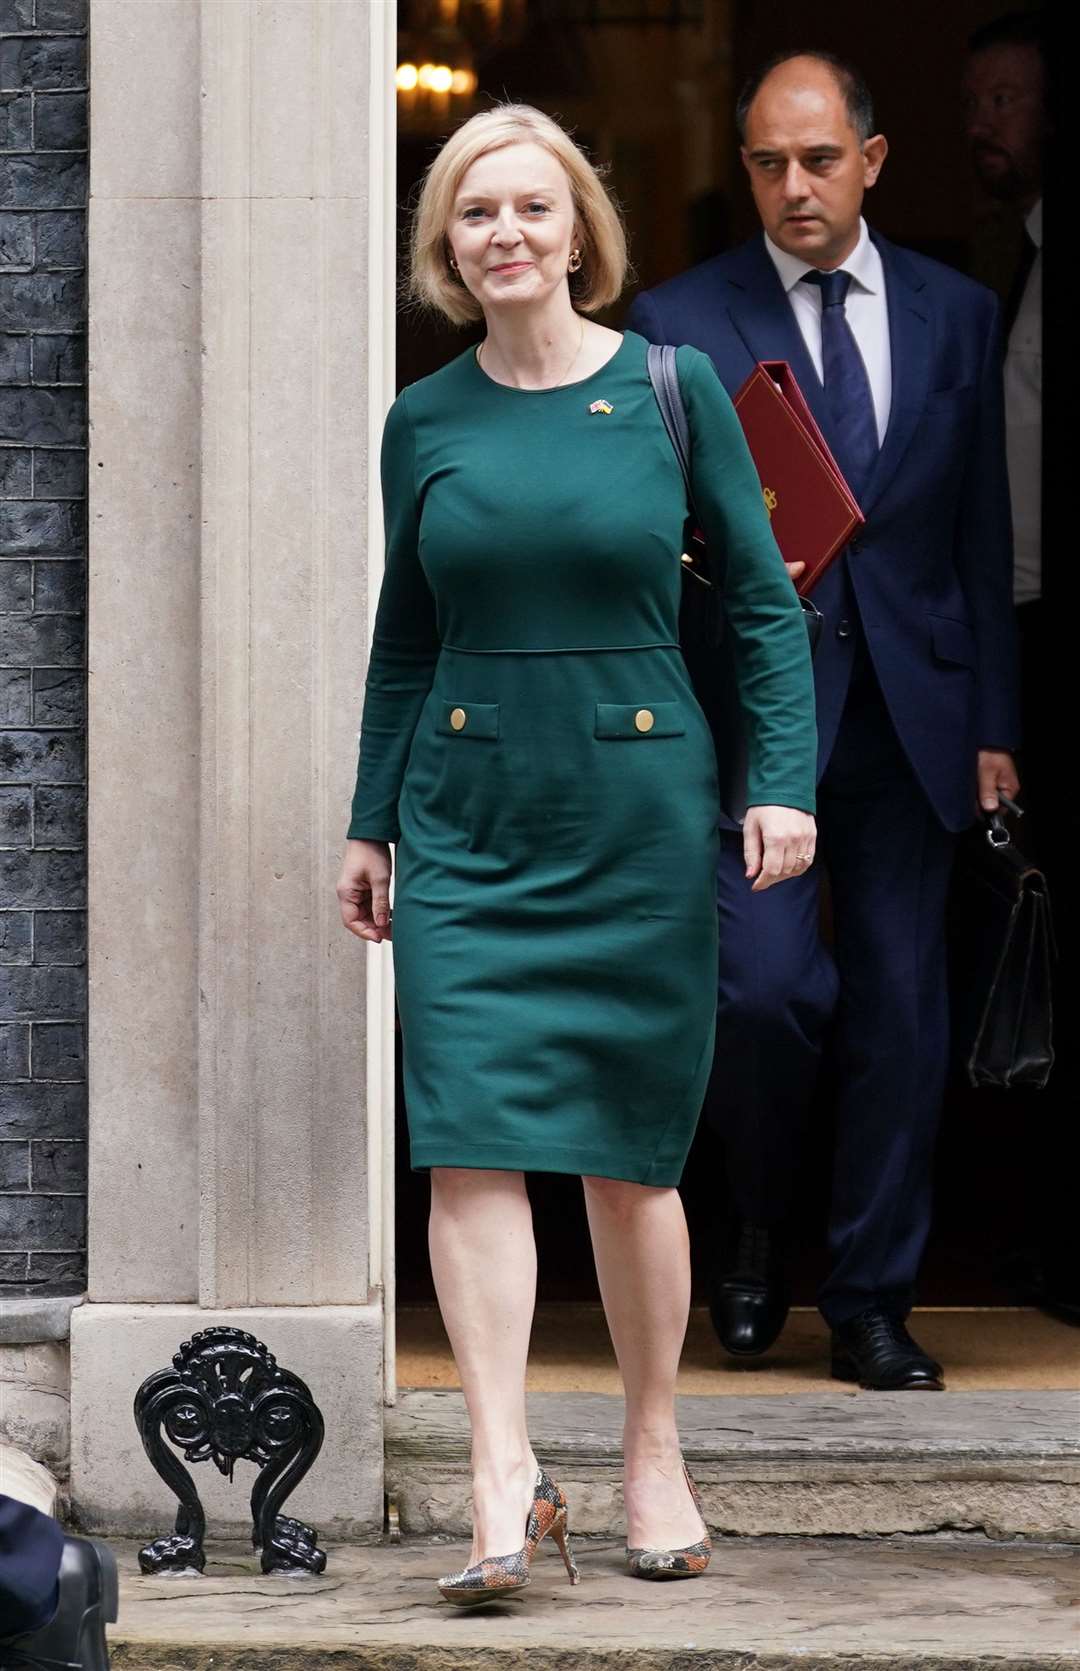 Prime Minister Liz Truss leaves 10 Downing Street for the House of Commons, where she set out her energy plan (Kirsty O’Connor/PA)